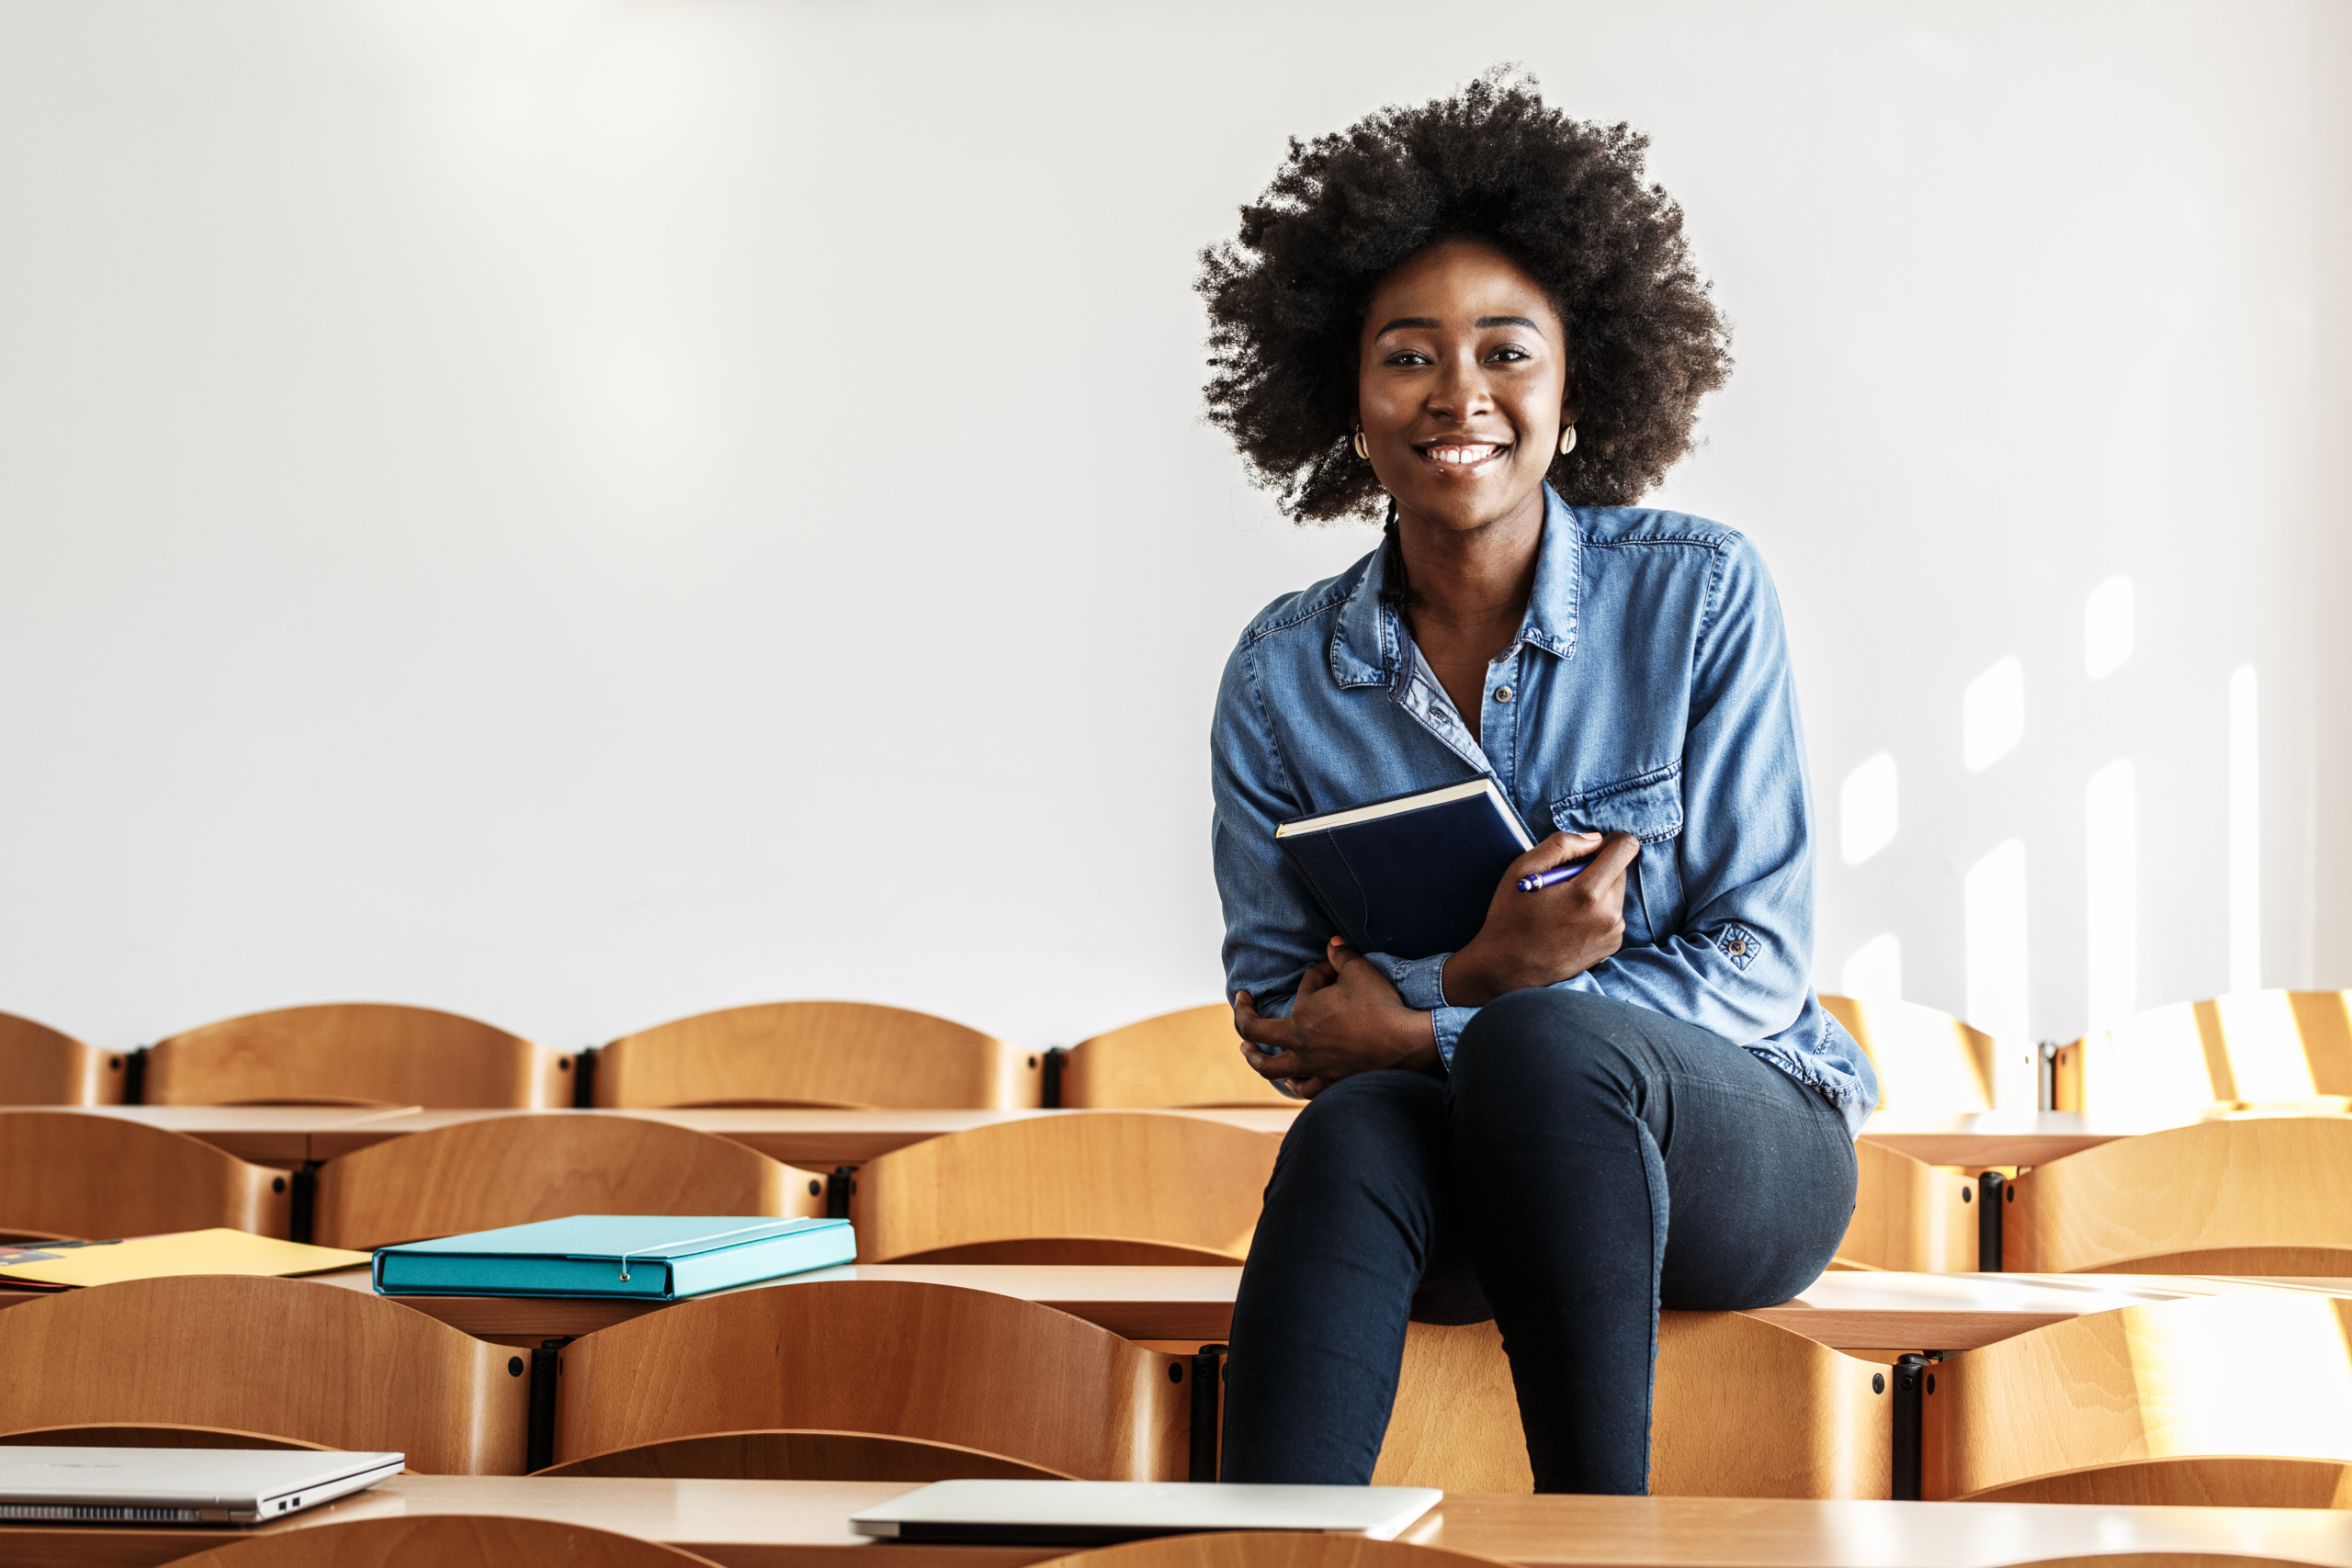 An African American woman smiles for the camera while sitting atop desks in a classroom. FEEA has compiled the best resources to guide students and parents through the college admissions journey.